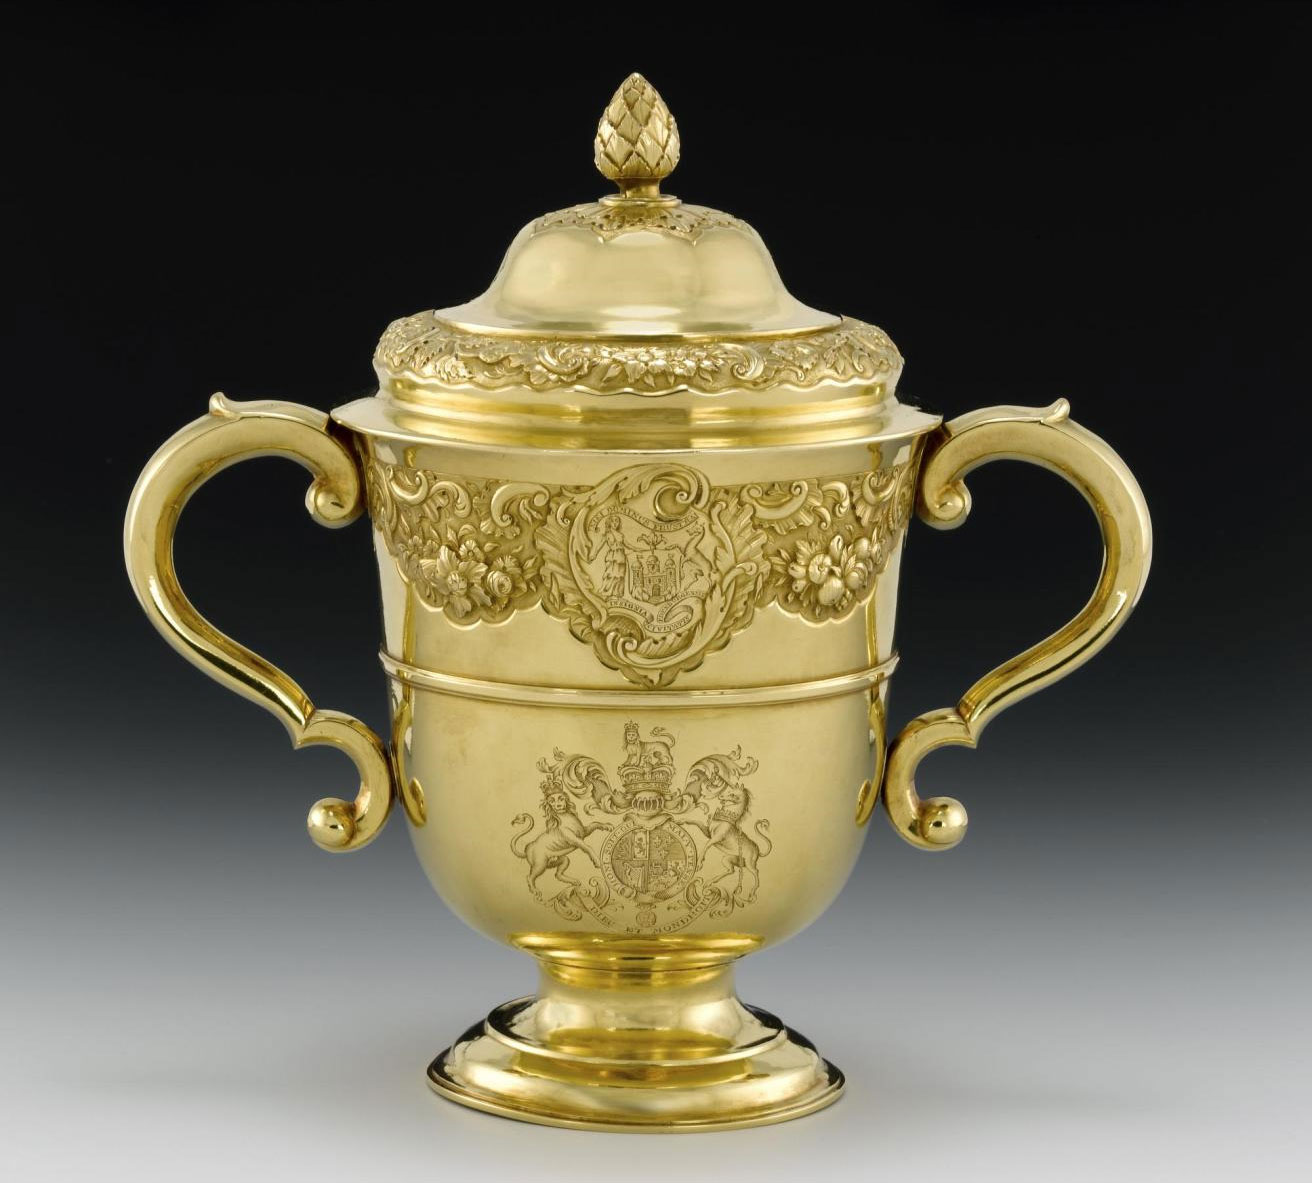 Gold cup and cover awarded as the King's Plate Prize at Leith Races. Made by Ker and Dempster of Edinburgh, c1751.